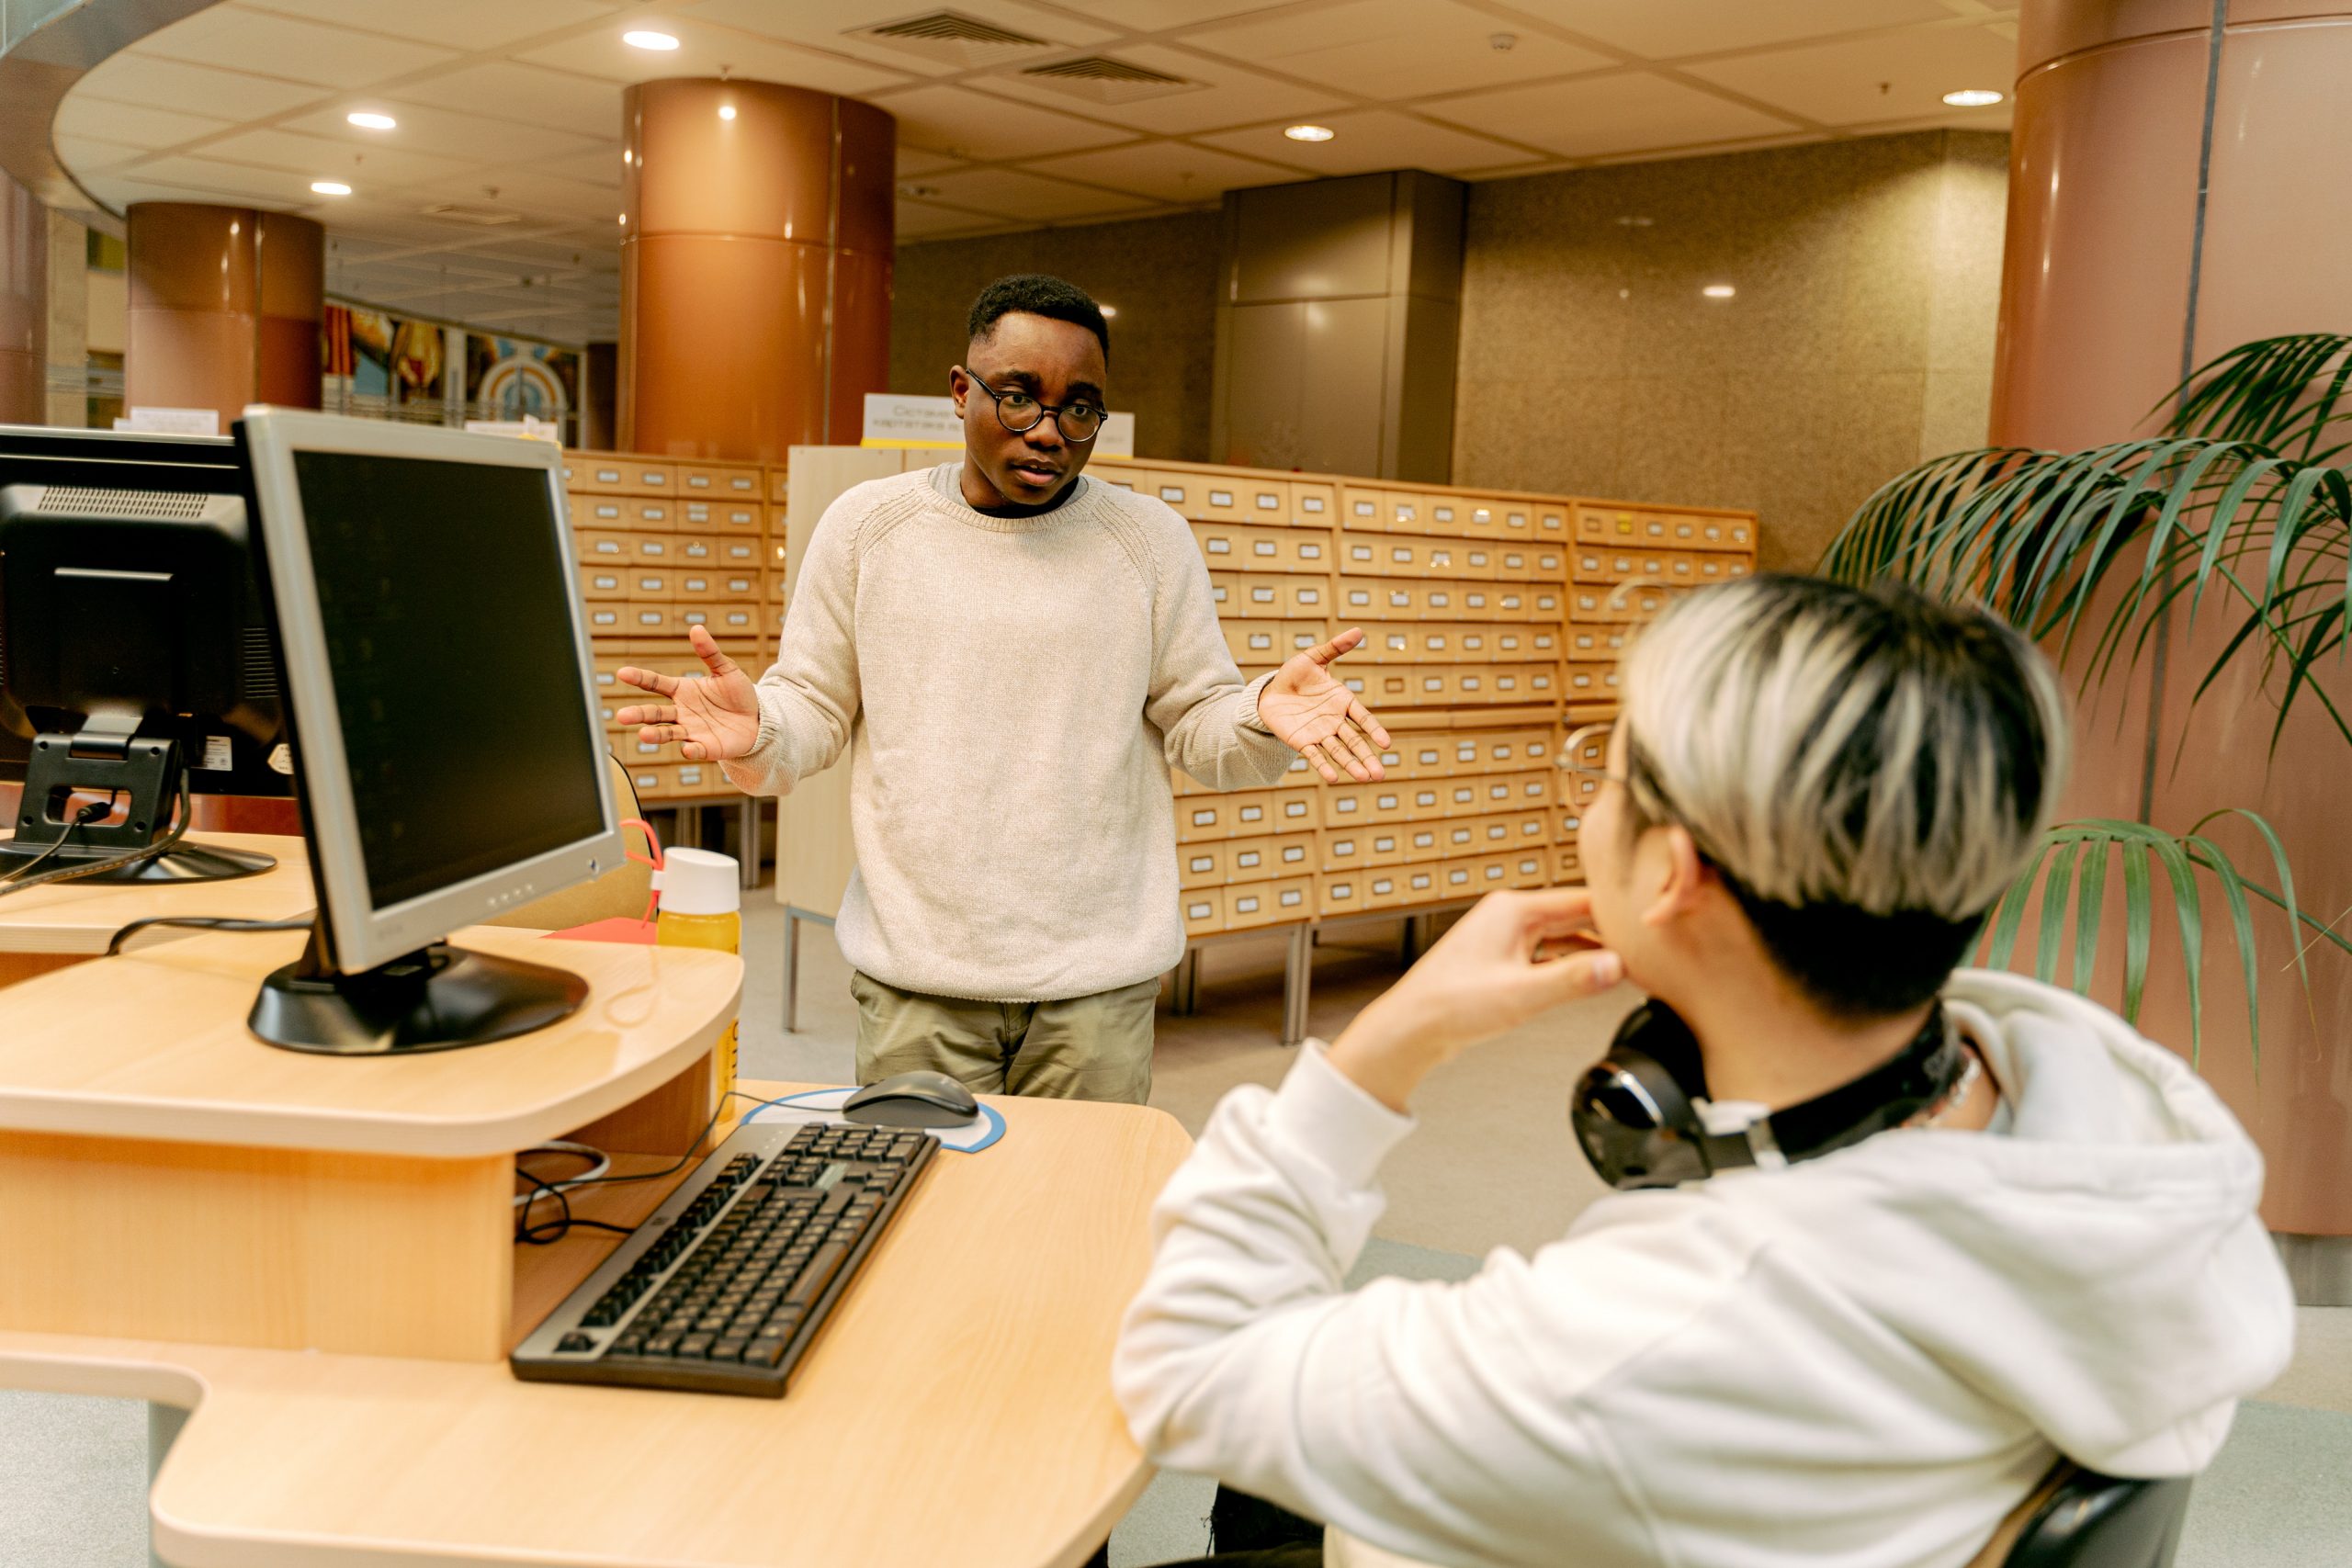 A young male adult gesticulates to another young male adult, who is sitting at a computer desk in an office space.